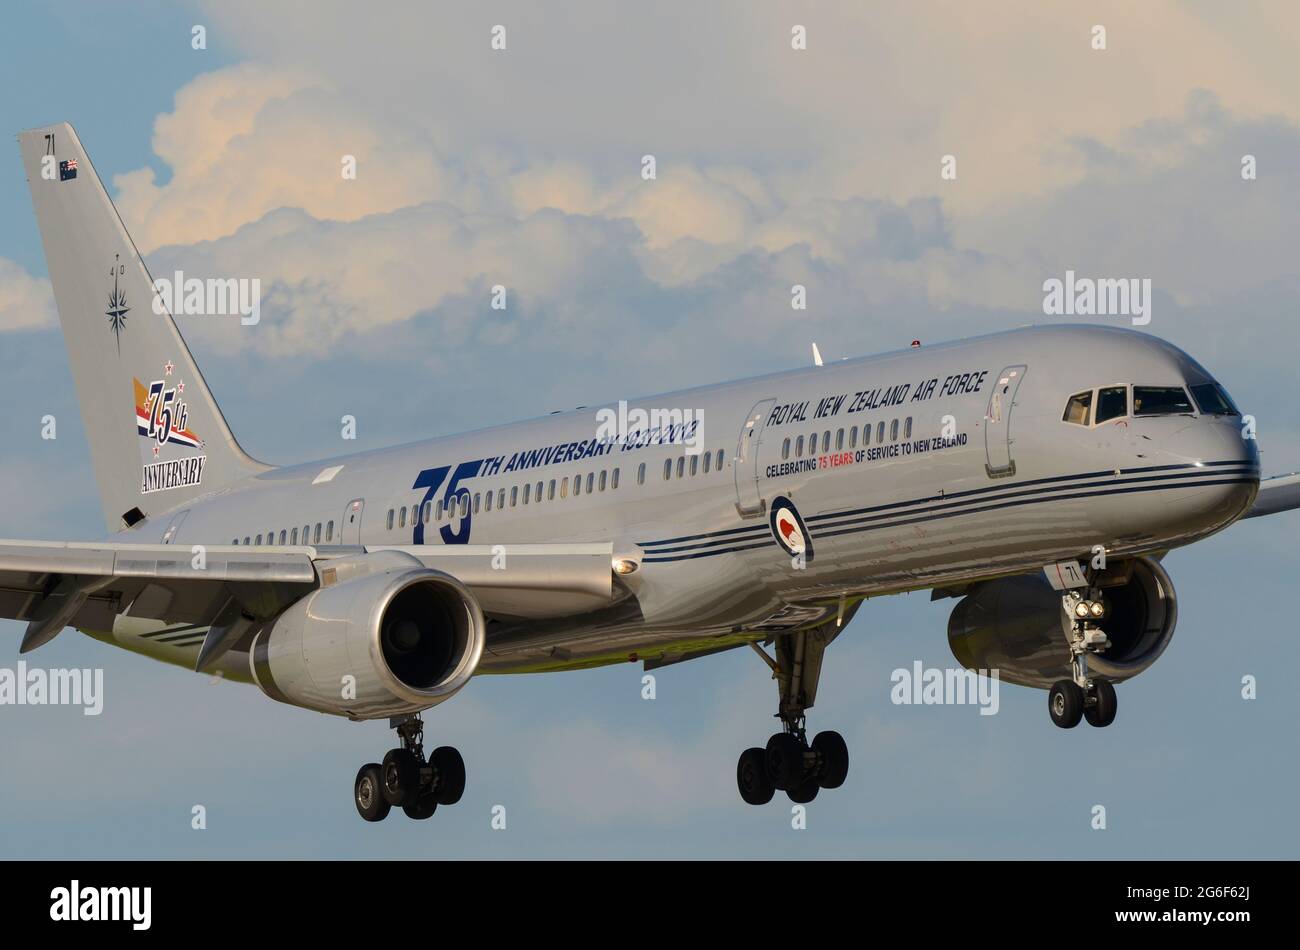 Royal New Zealand Air Force RNZAF Boeing 757 jet plane aircraft with special 75th anniversary paint scheme, 1937-2012. VIP transport plane NZ7571 Stock Photo